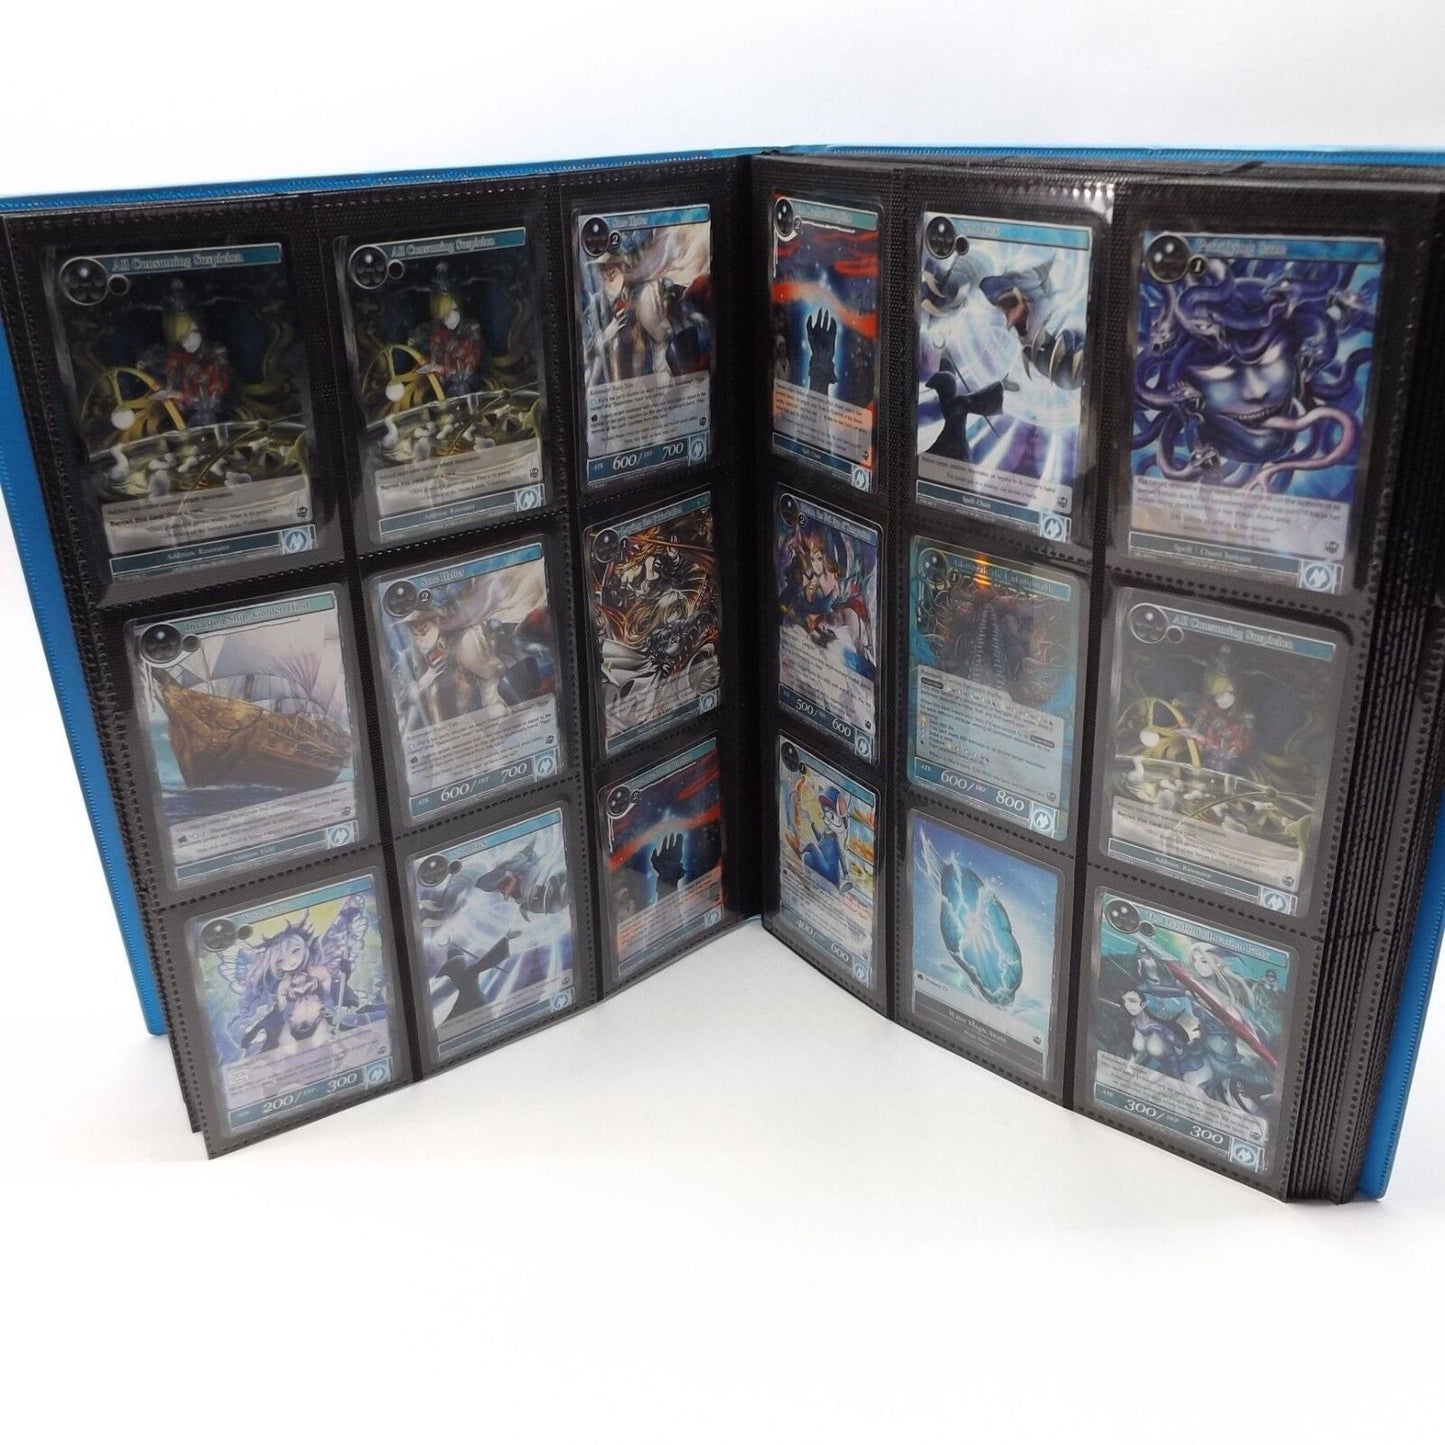 BOOK OF 288 PLUS FORCE OF WILL GAME CARDS IN PROTECTIVE SLEEVES